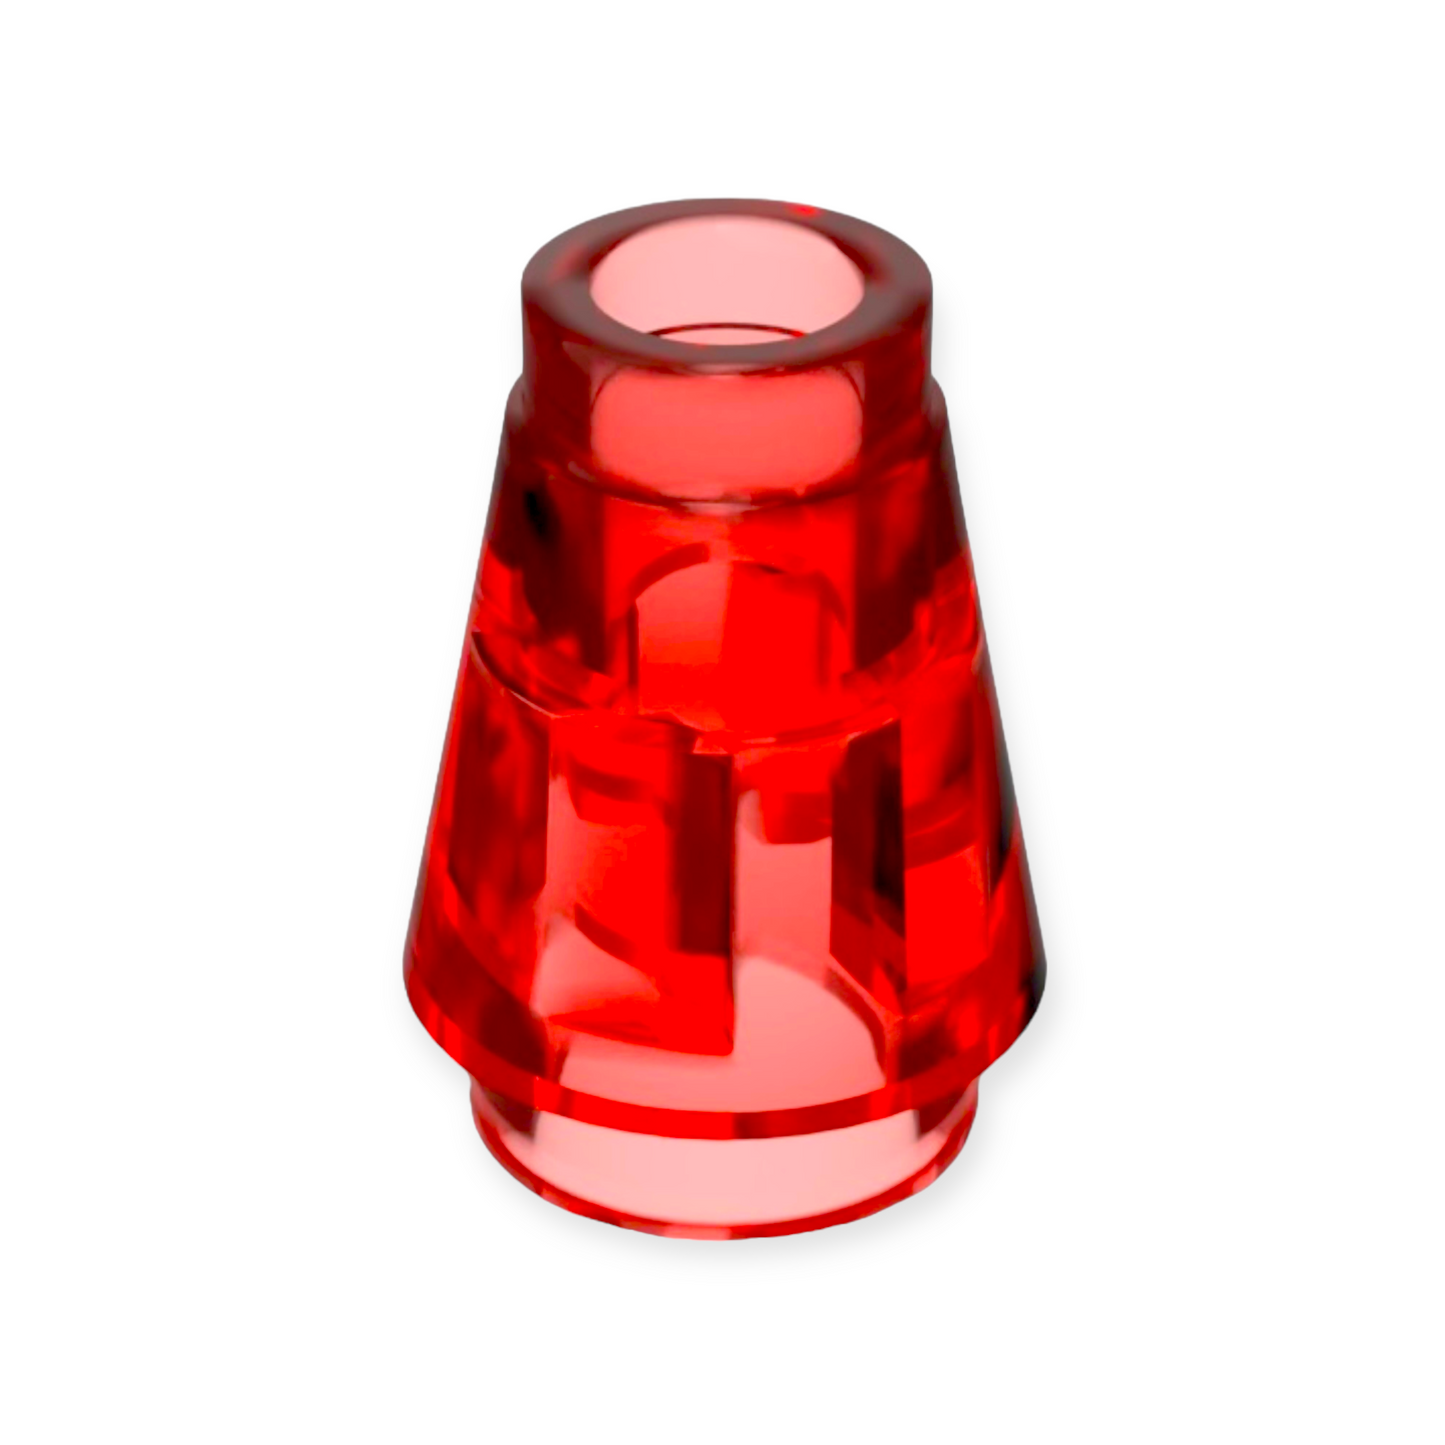 LEGO Cone 1x1 with Top Groove in Trans-Red